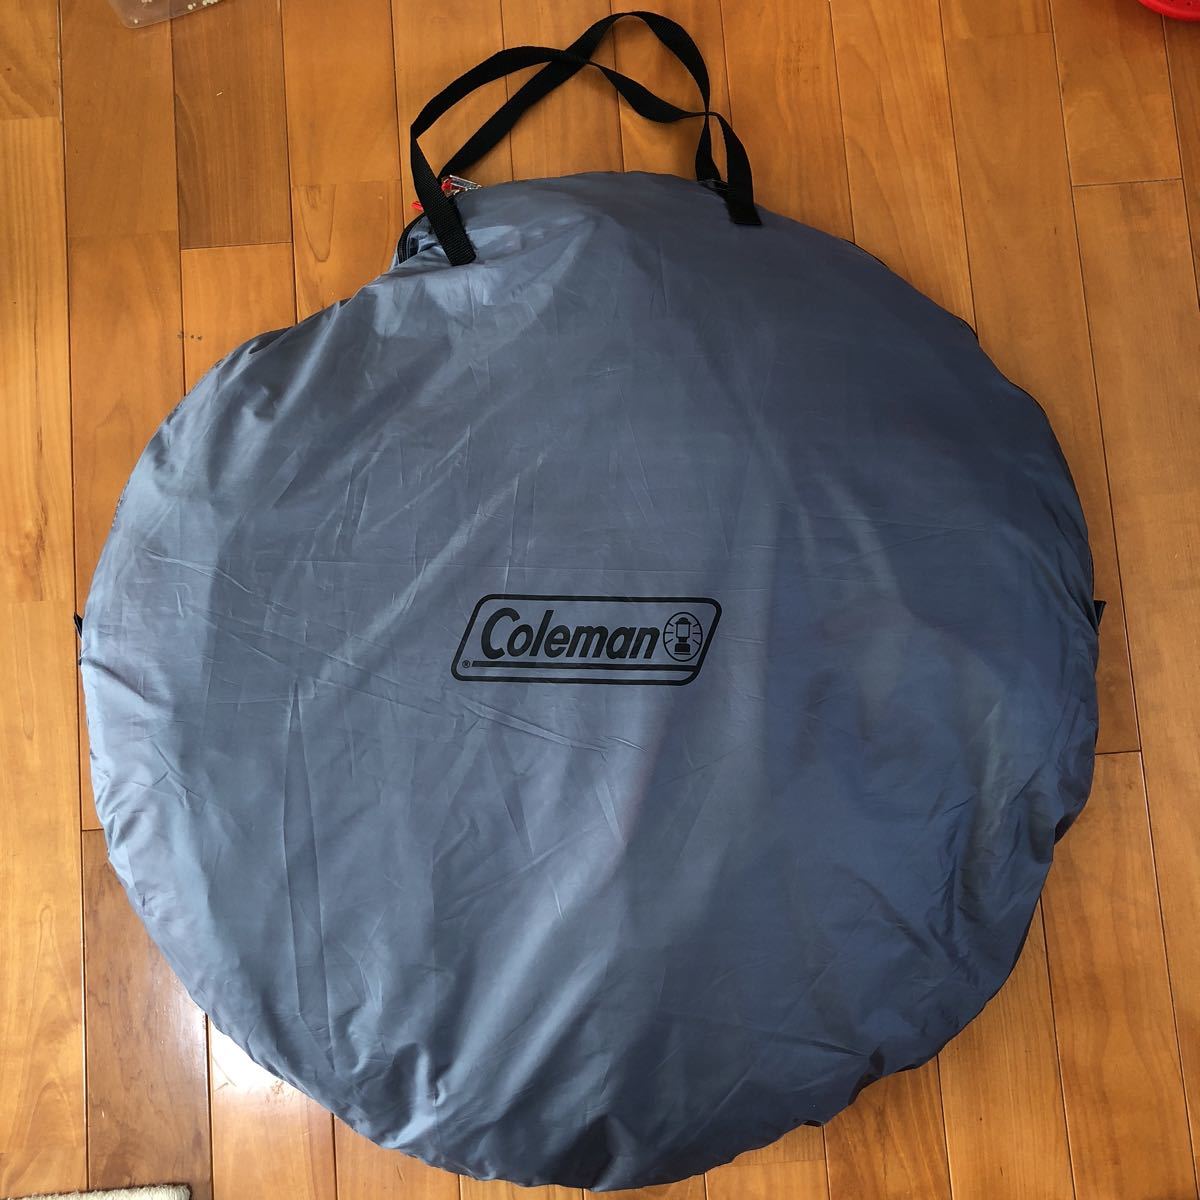 Coleman Coleman Quickup Dome W + Popup Tent Solo Camp Duo Camp    原文:コールマン Coleman クイックアップドームW＋ ポップアップテント ソロキャンプ デュオキャンプ